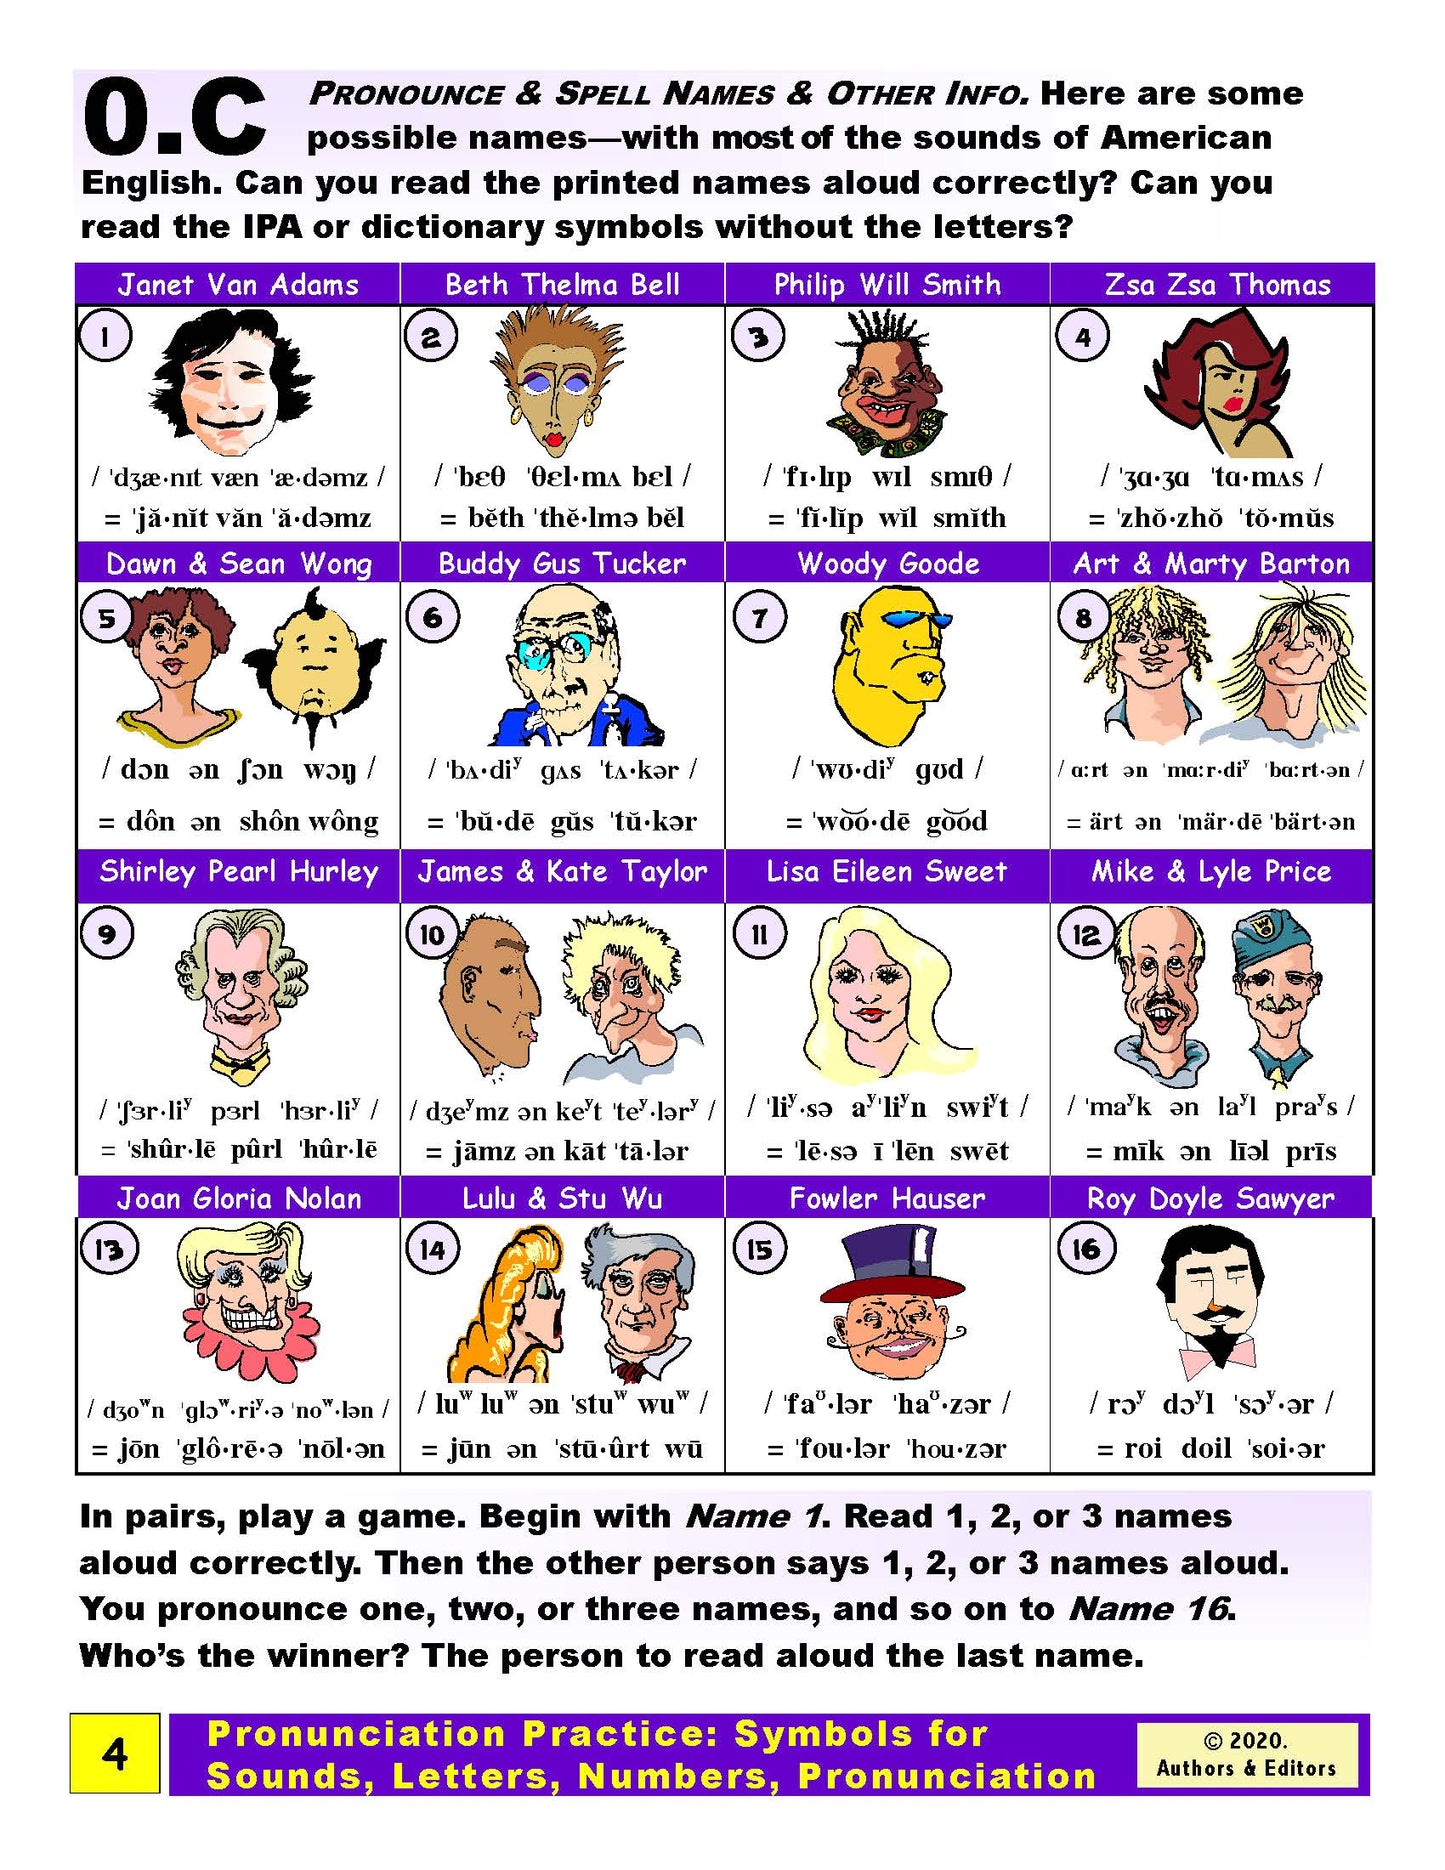 E-00.03a Get Pronunciation Practice with Symbols for Sounds, Alphabet Letters, & Greetings